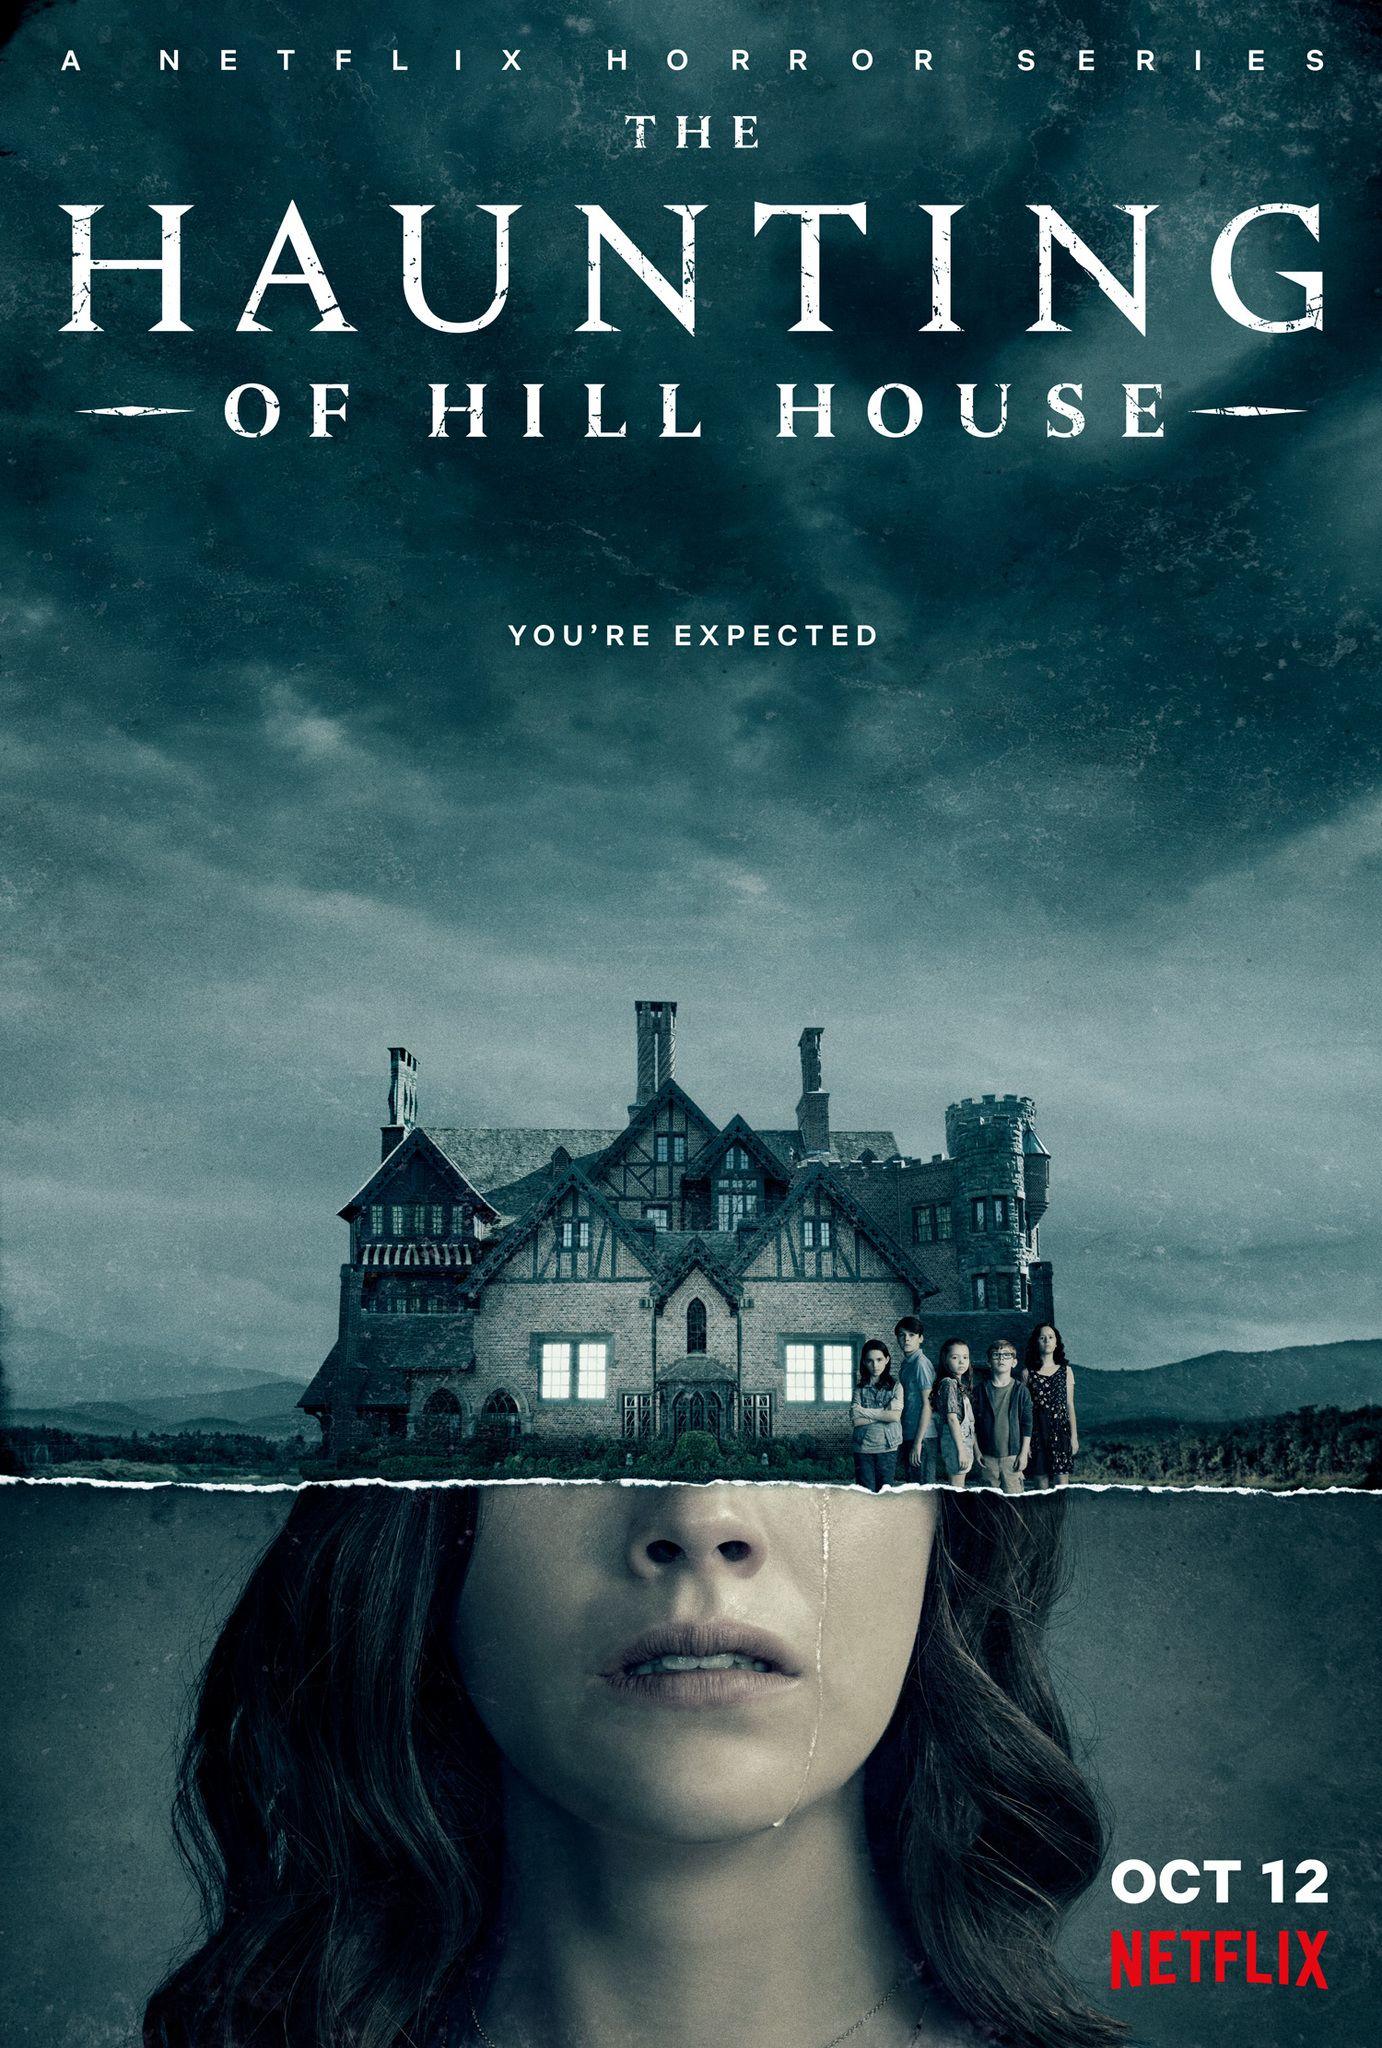 The Haunting of Hill House (TV Series 2018– )